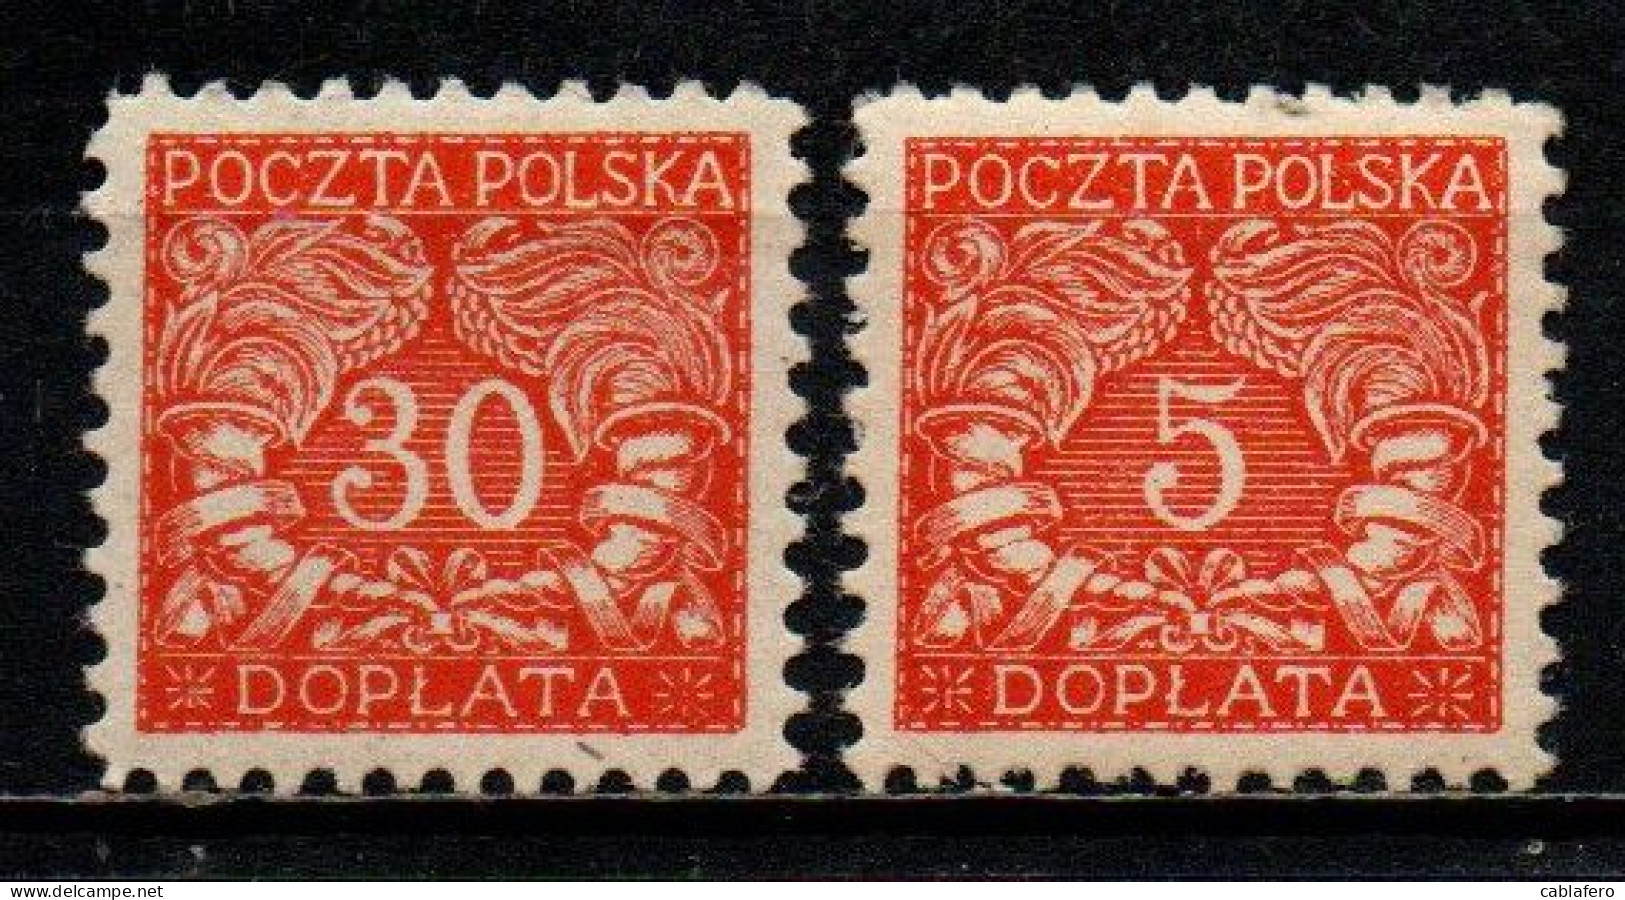 POLONIA - 1919 - Numerals Of Value - MNH - Postage Due